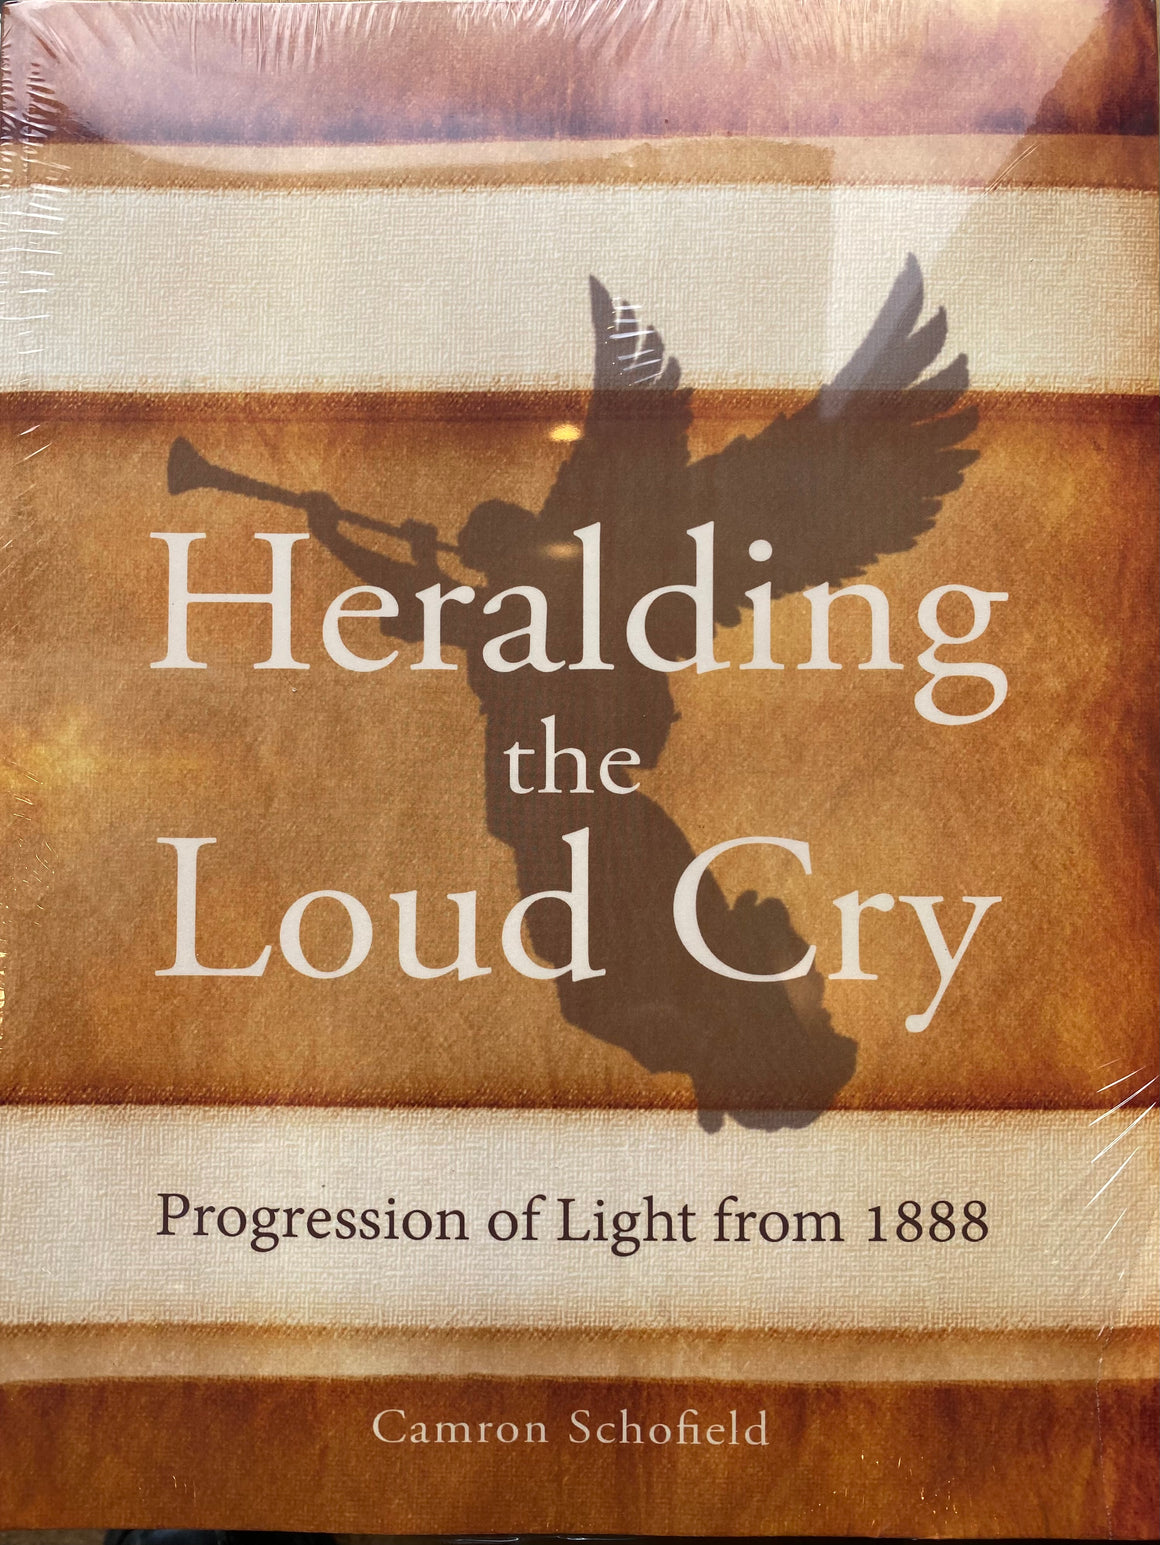 Heralding the Loud Cry Progression of Light from 1888, by Camron Schofield